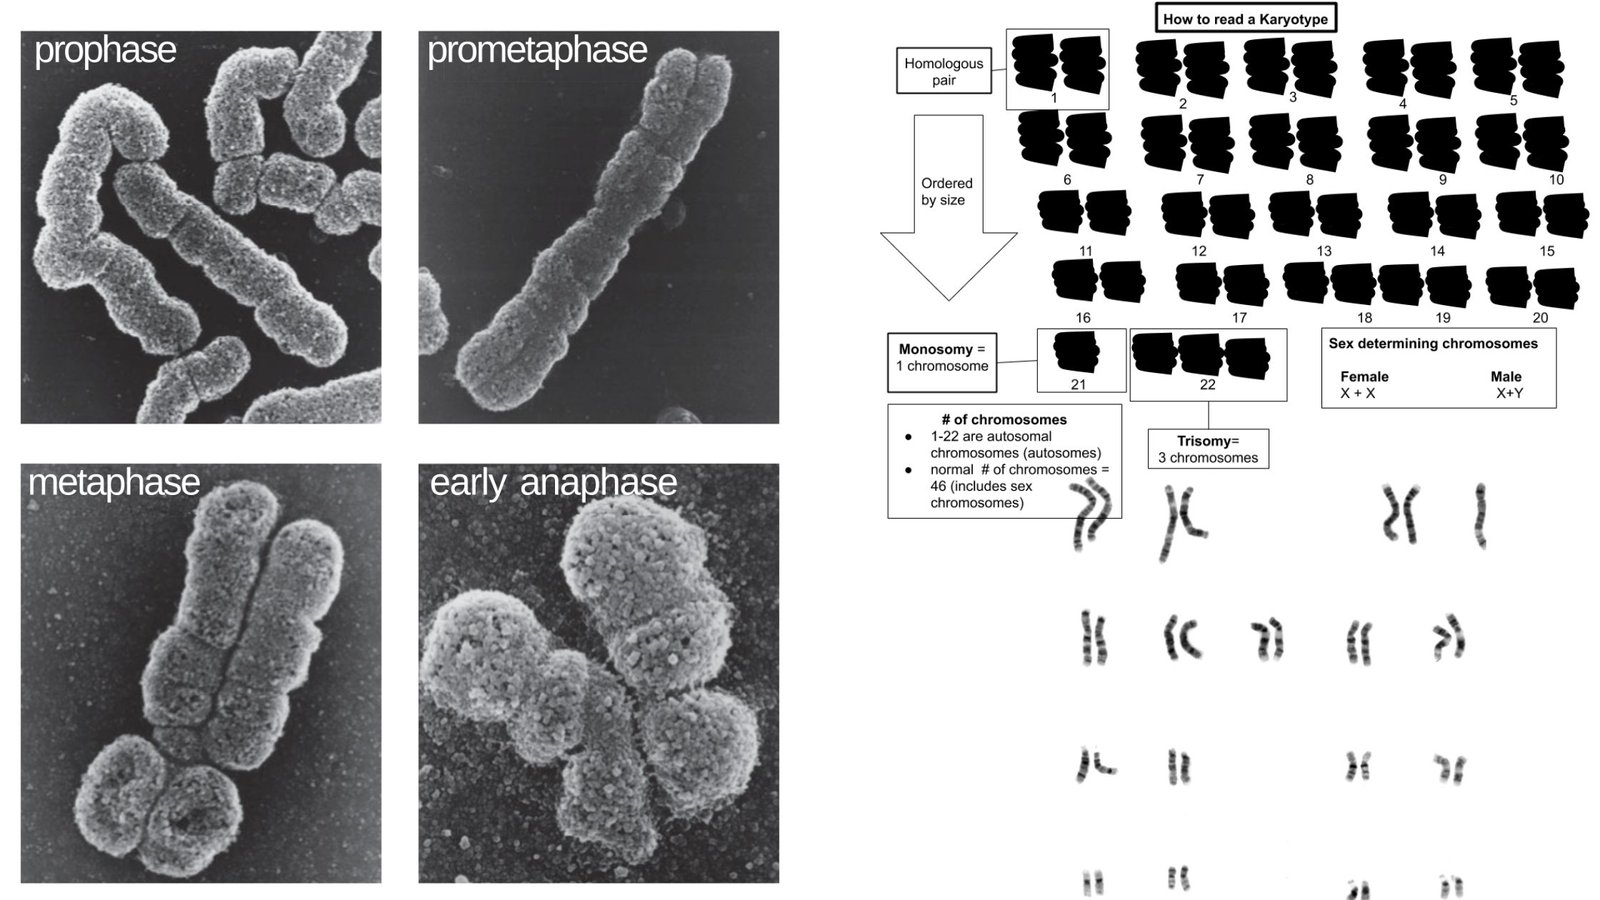 Karyotyping - Definition, Steps, Procedure and Applications